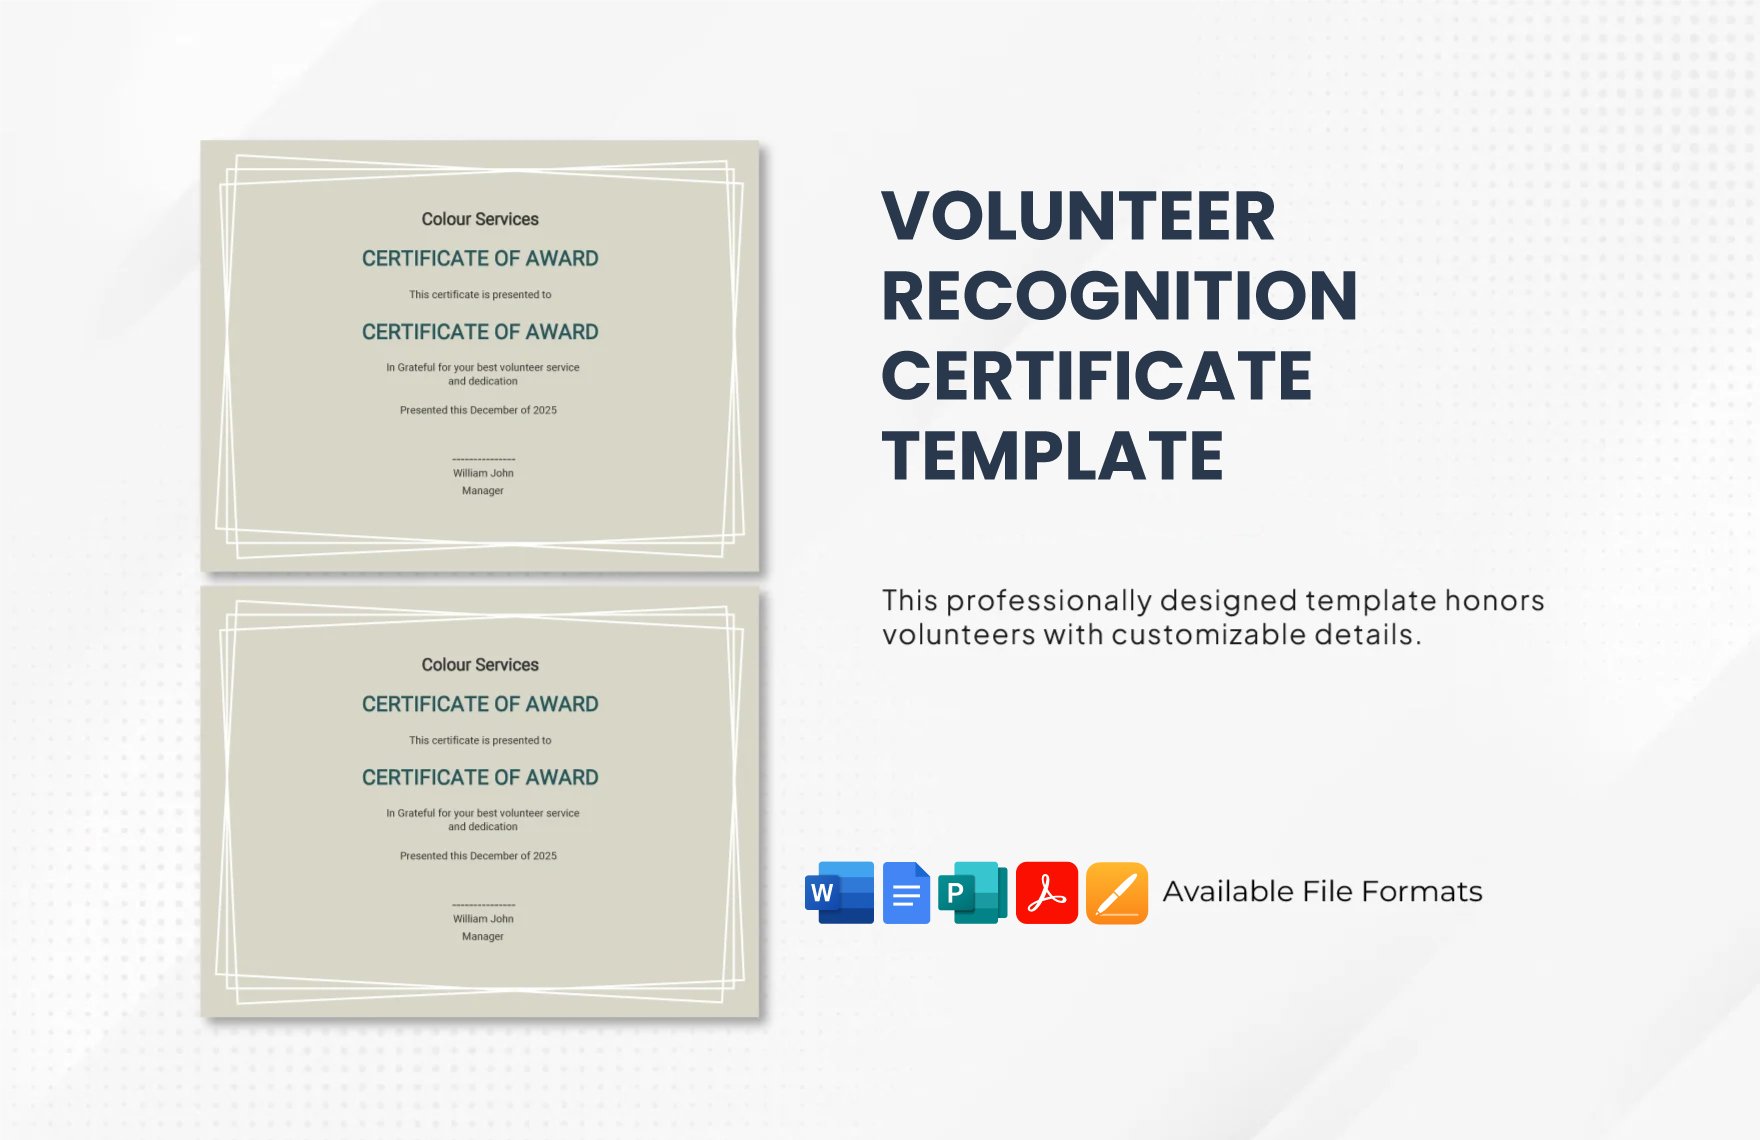 Volunteer Recognition Certificate Template Template in Word, Google Docs, PDF, Apple Pages, Publisher